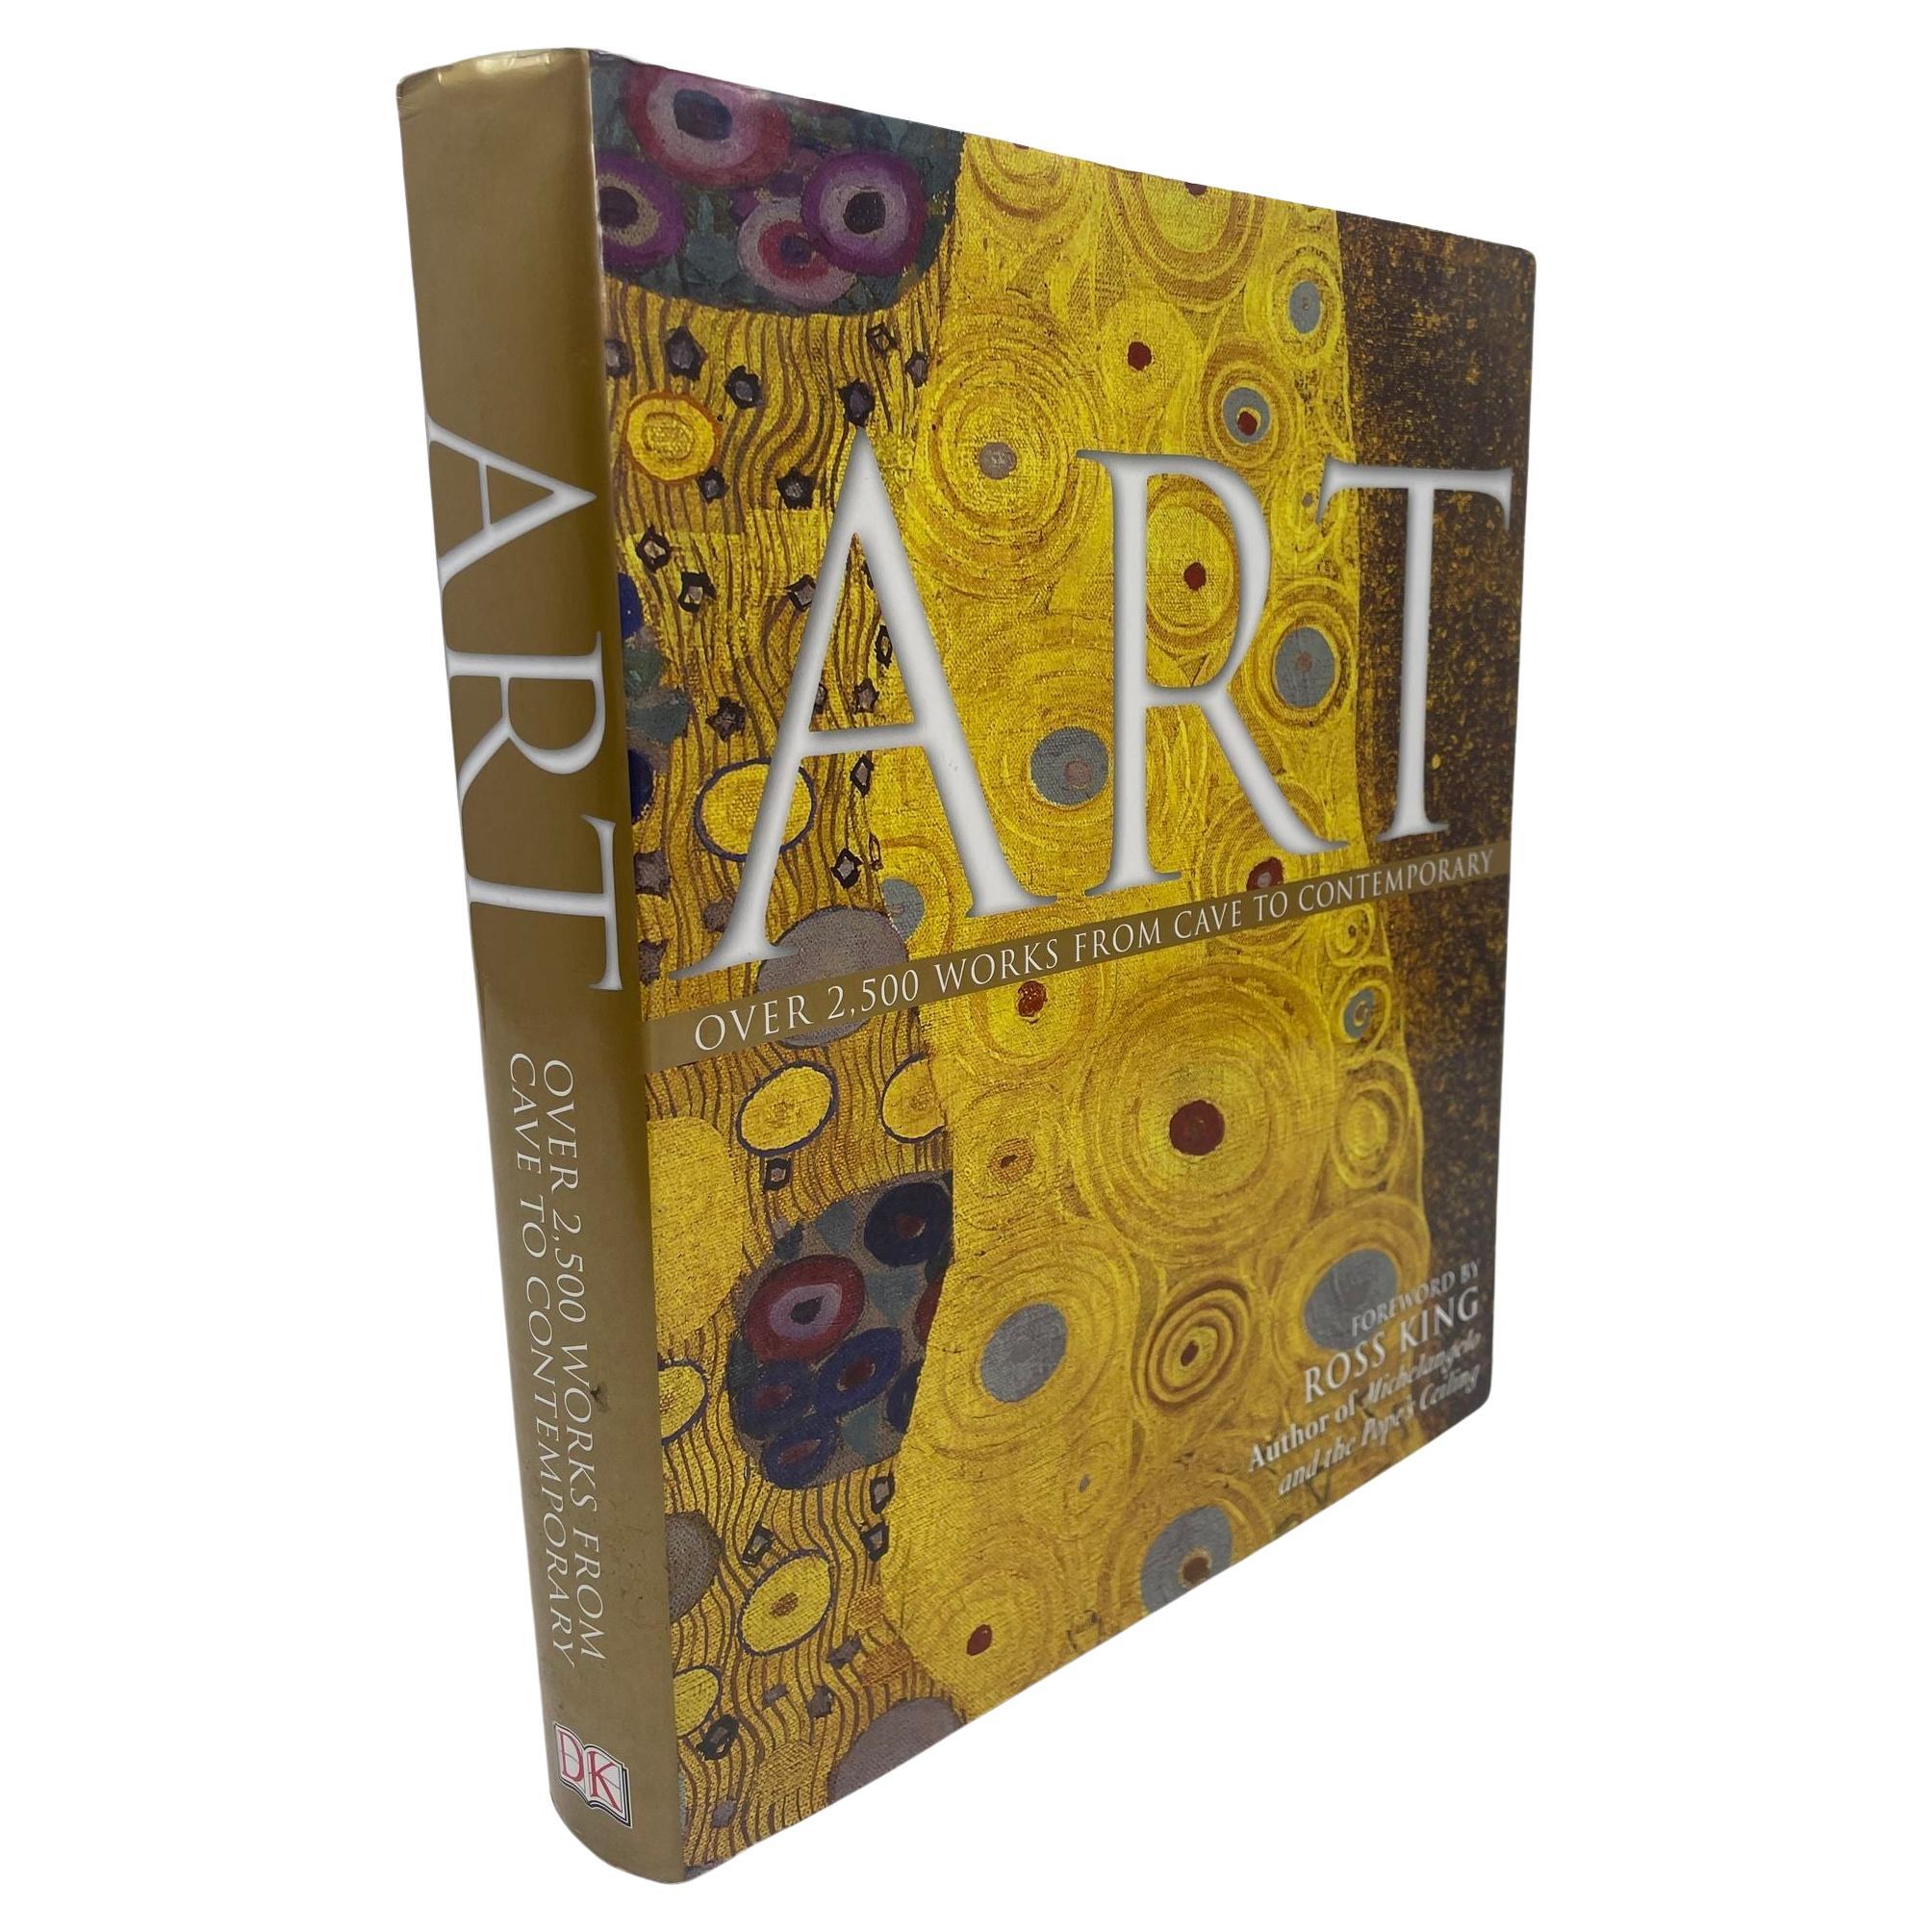 Art Over 2500 Works from Cave to Contemporary by Nigel Ritchie Hardcover Book For Sale